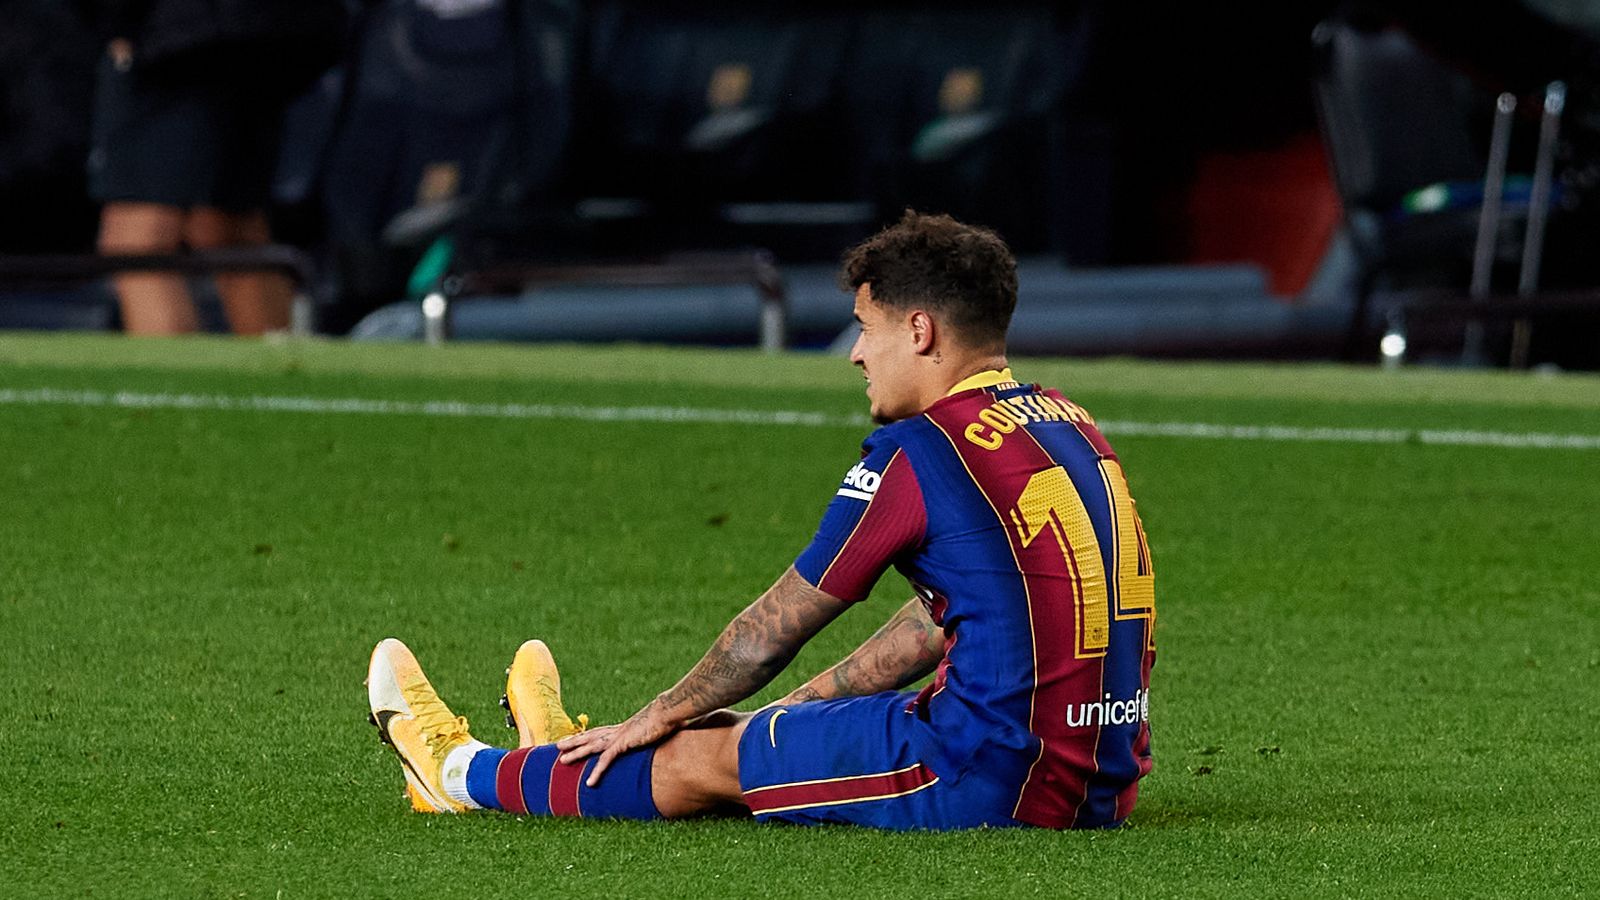 Philippe Coutinho: Barcelona midfielder to undergo surgery on knee injury he suffered during draw with Eibar | Football News | Sky Sports